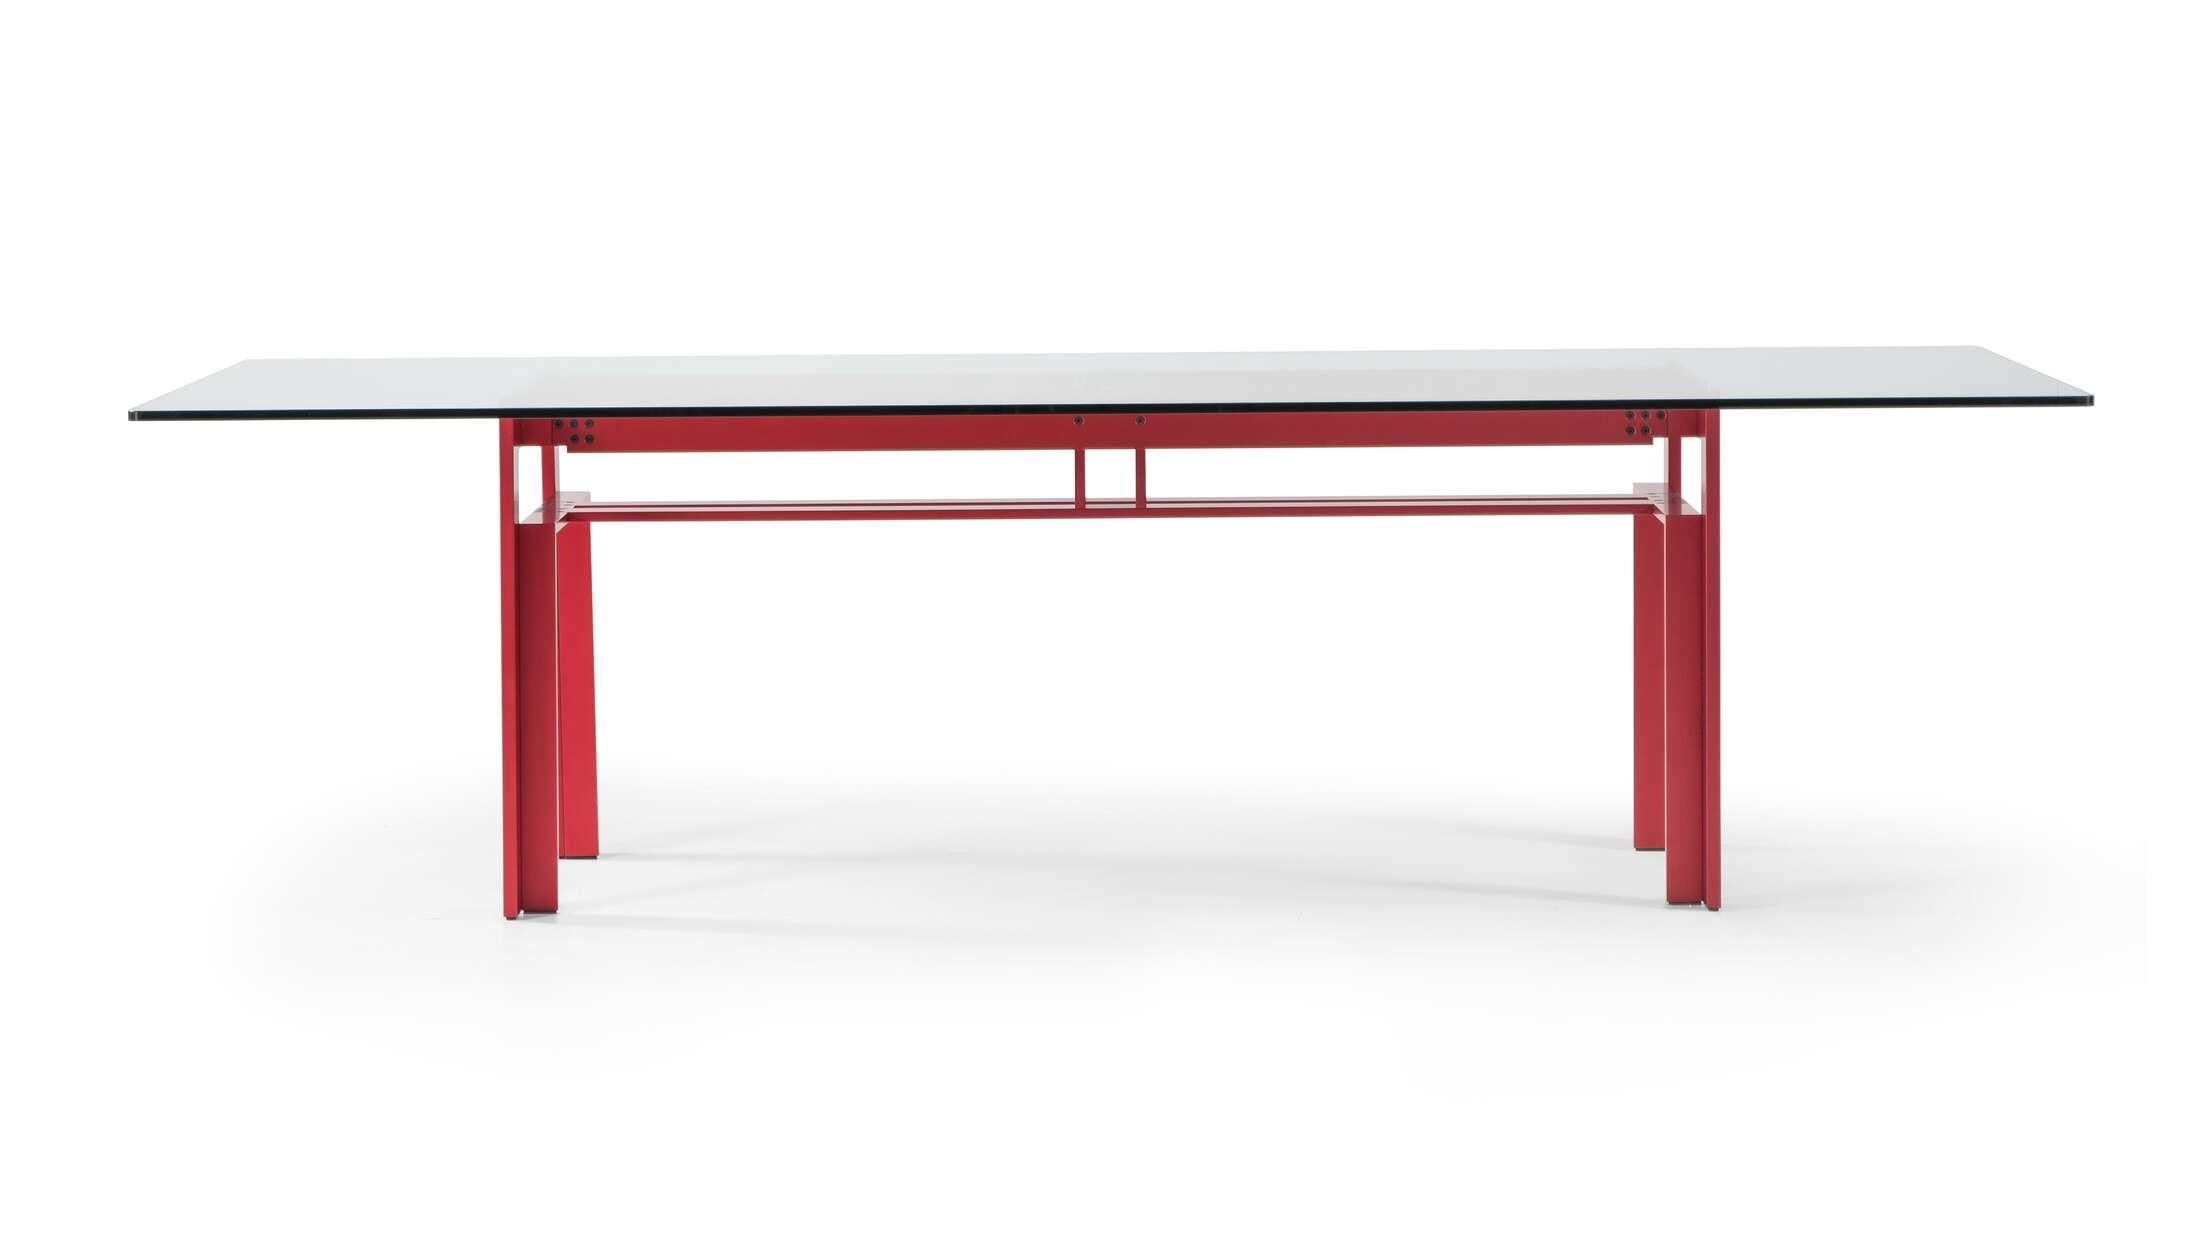 Doge Large Dining Table designed by Carlo Scarpa.
Manufactured by Cassina (Italy)

ULTRARATIONAL EMBLEM
A sculptural structure that has become an emblem of Italian design, a trademark of the new ultrarational movement that in the late 1960s